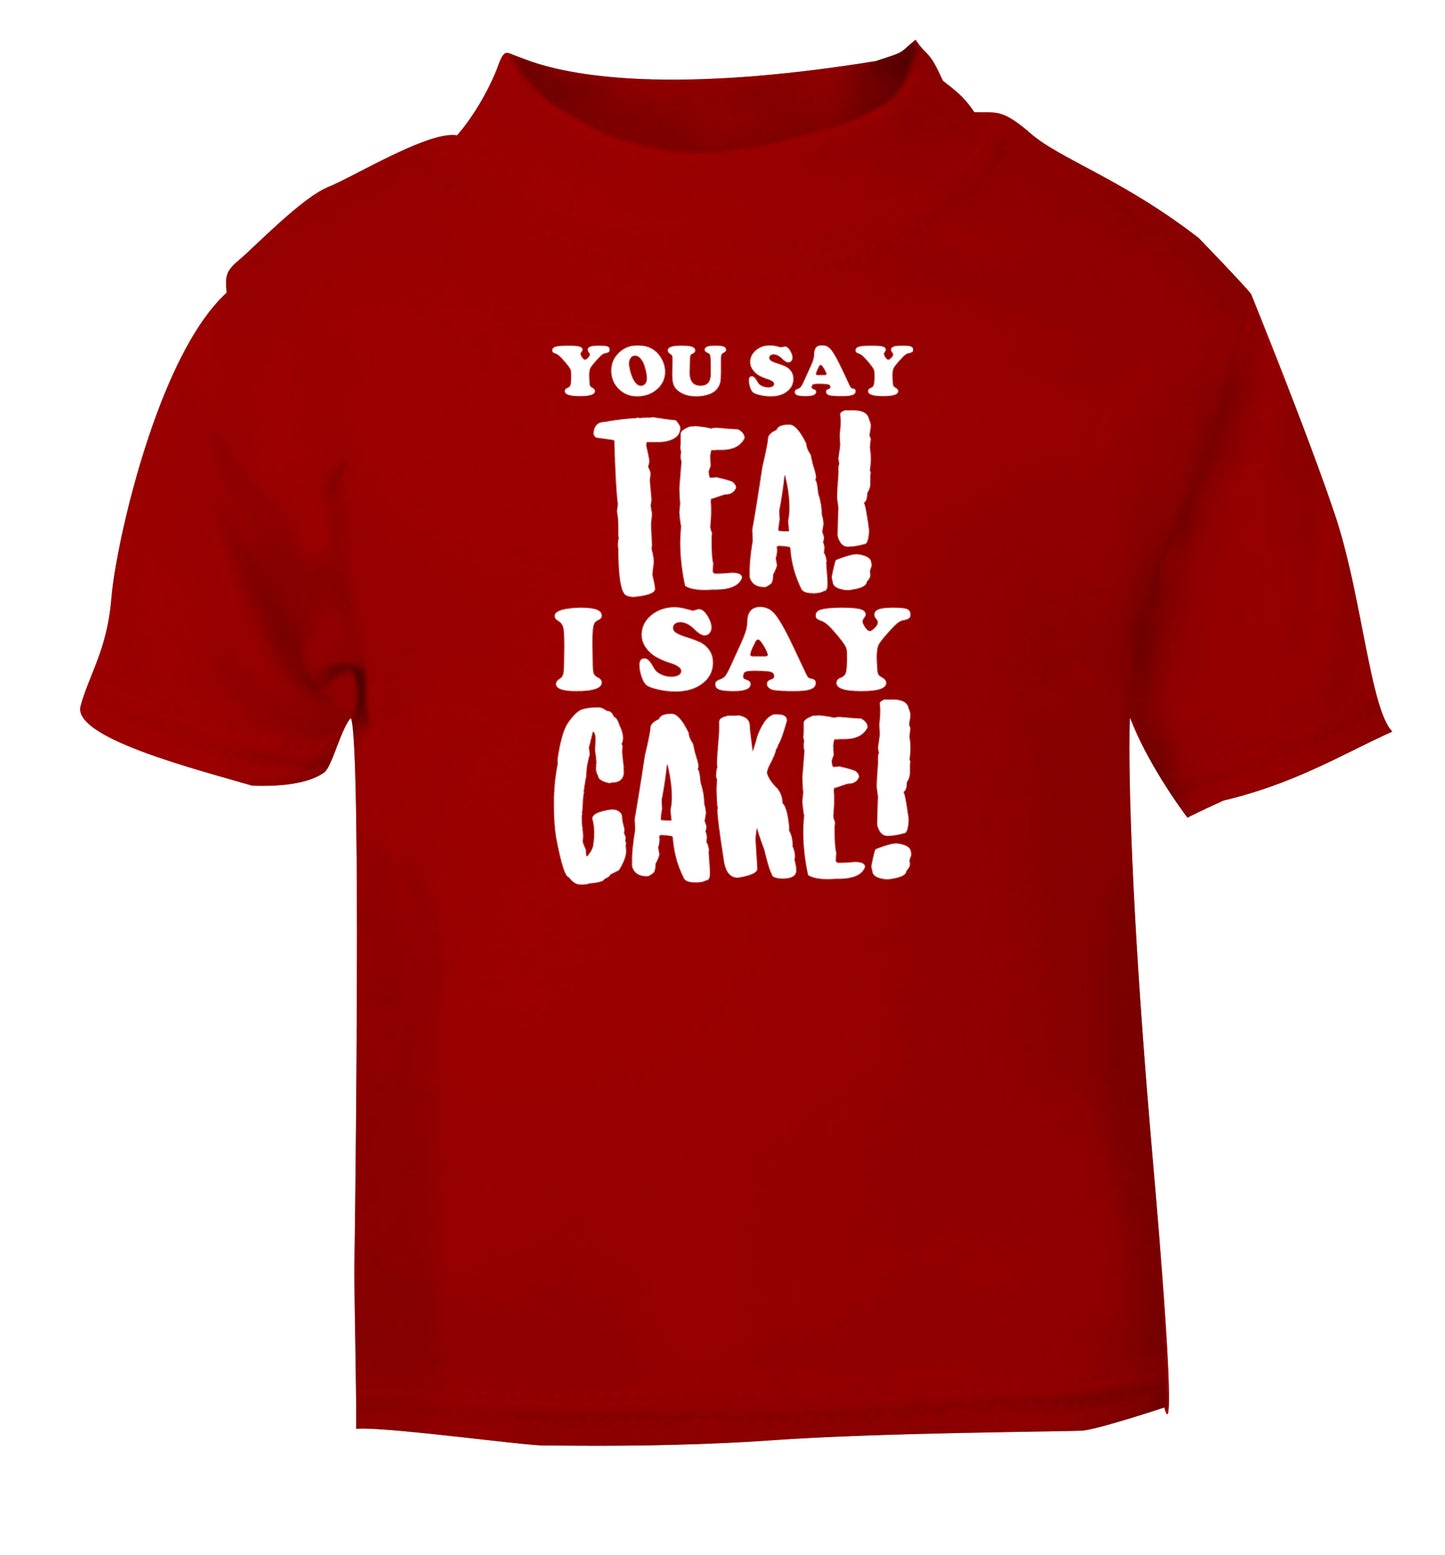 You say tea I say cake! red Baby Toddler Tshirt 2 Years